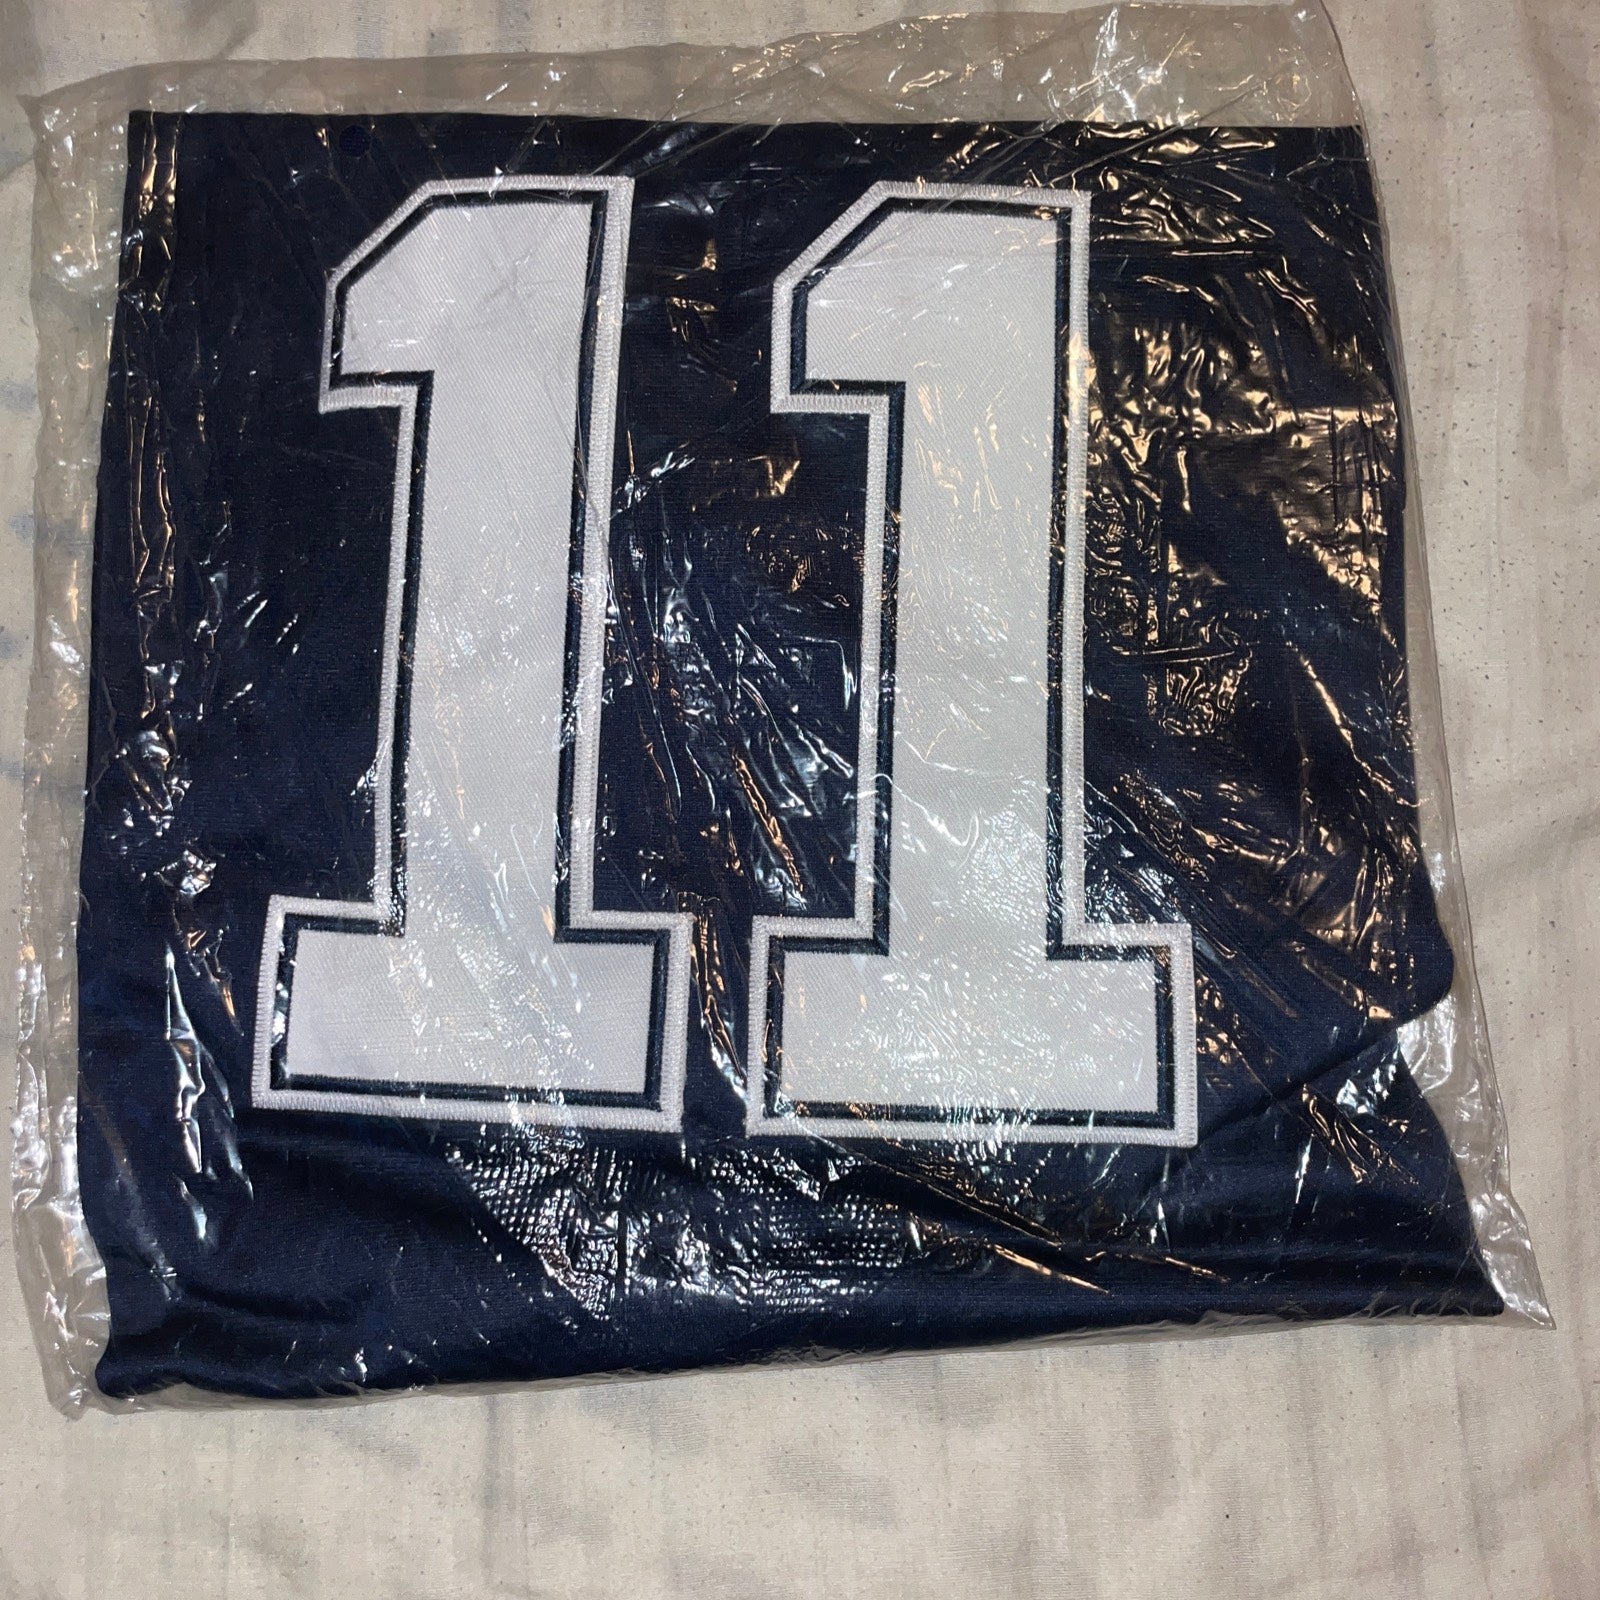 Brand New Dallas Cowboys Micah Parsons Jersey With Tags - Size Men's Large